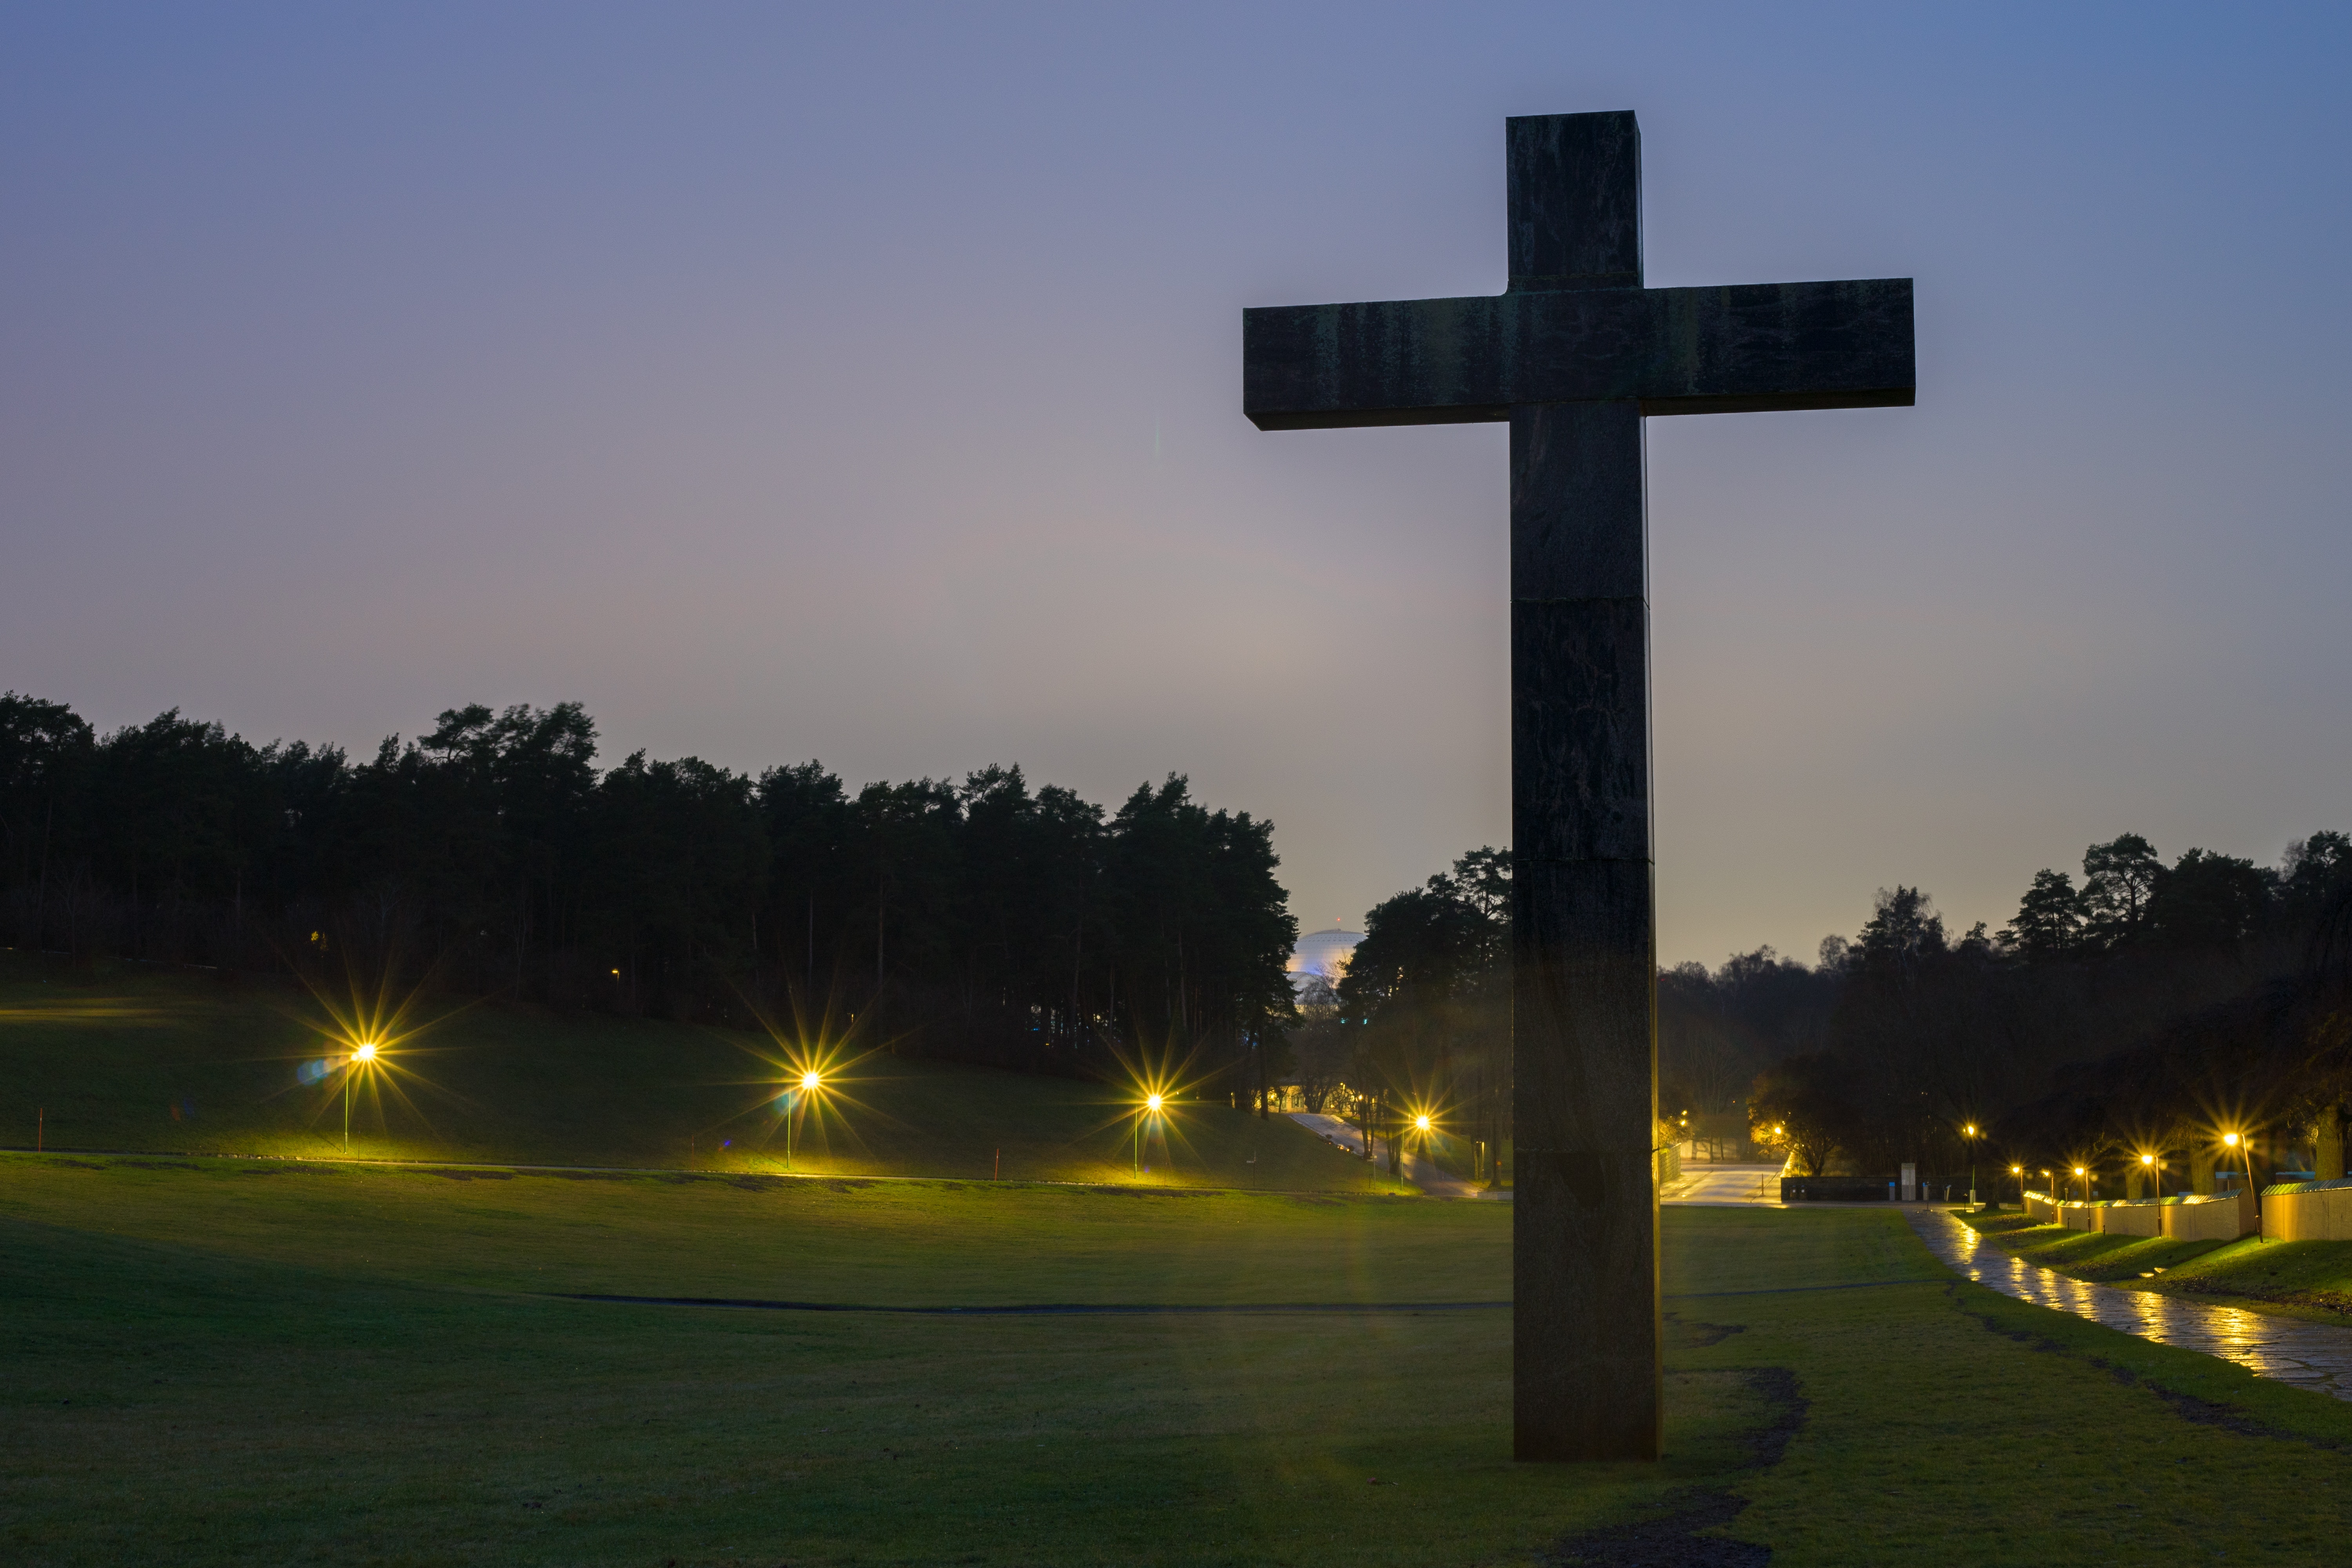 Brown Cross Statue on Green Grass Field With Turned on Light during Nighttime, Cemetery, Cross, Dark, Dusk, HQ Photo